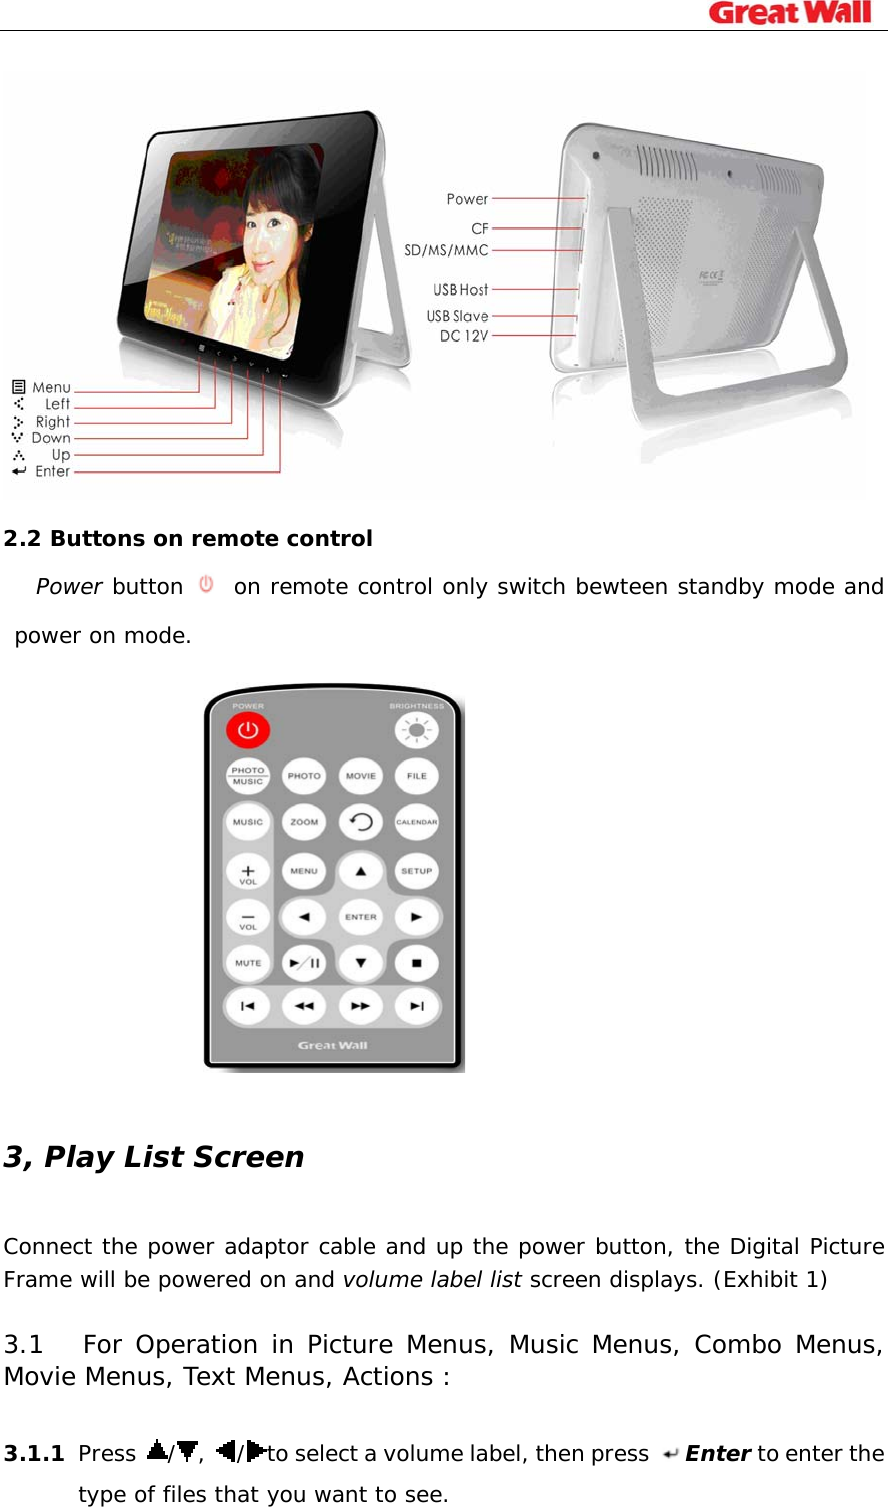                                                                               2.2 Buttons on remote control Power button   on remote control only switch bewteen standby mode and power on mode.   3, Play List Screen Connect the power adaptor cable and up the power button, the Digital Picture Frame will be powered on and volume label list screen displays. (Exhibit 1)  3.1   For Operation in Picture Menus, Music Menus, Combo Menus, Movie Menus, Text Menus, Actions :  3.1.1 Press  /,  /to select a volume label, then press  Enter to enter the type of files that you want to see. 